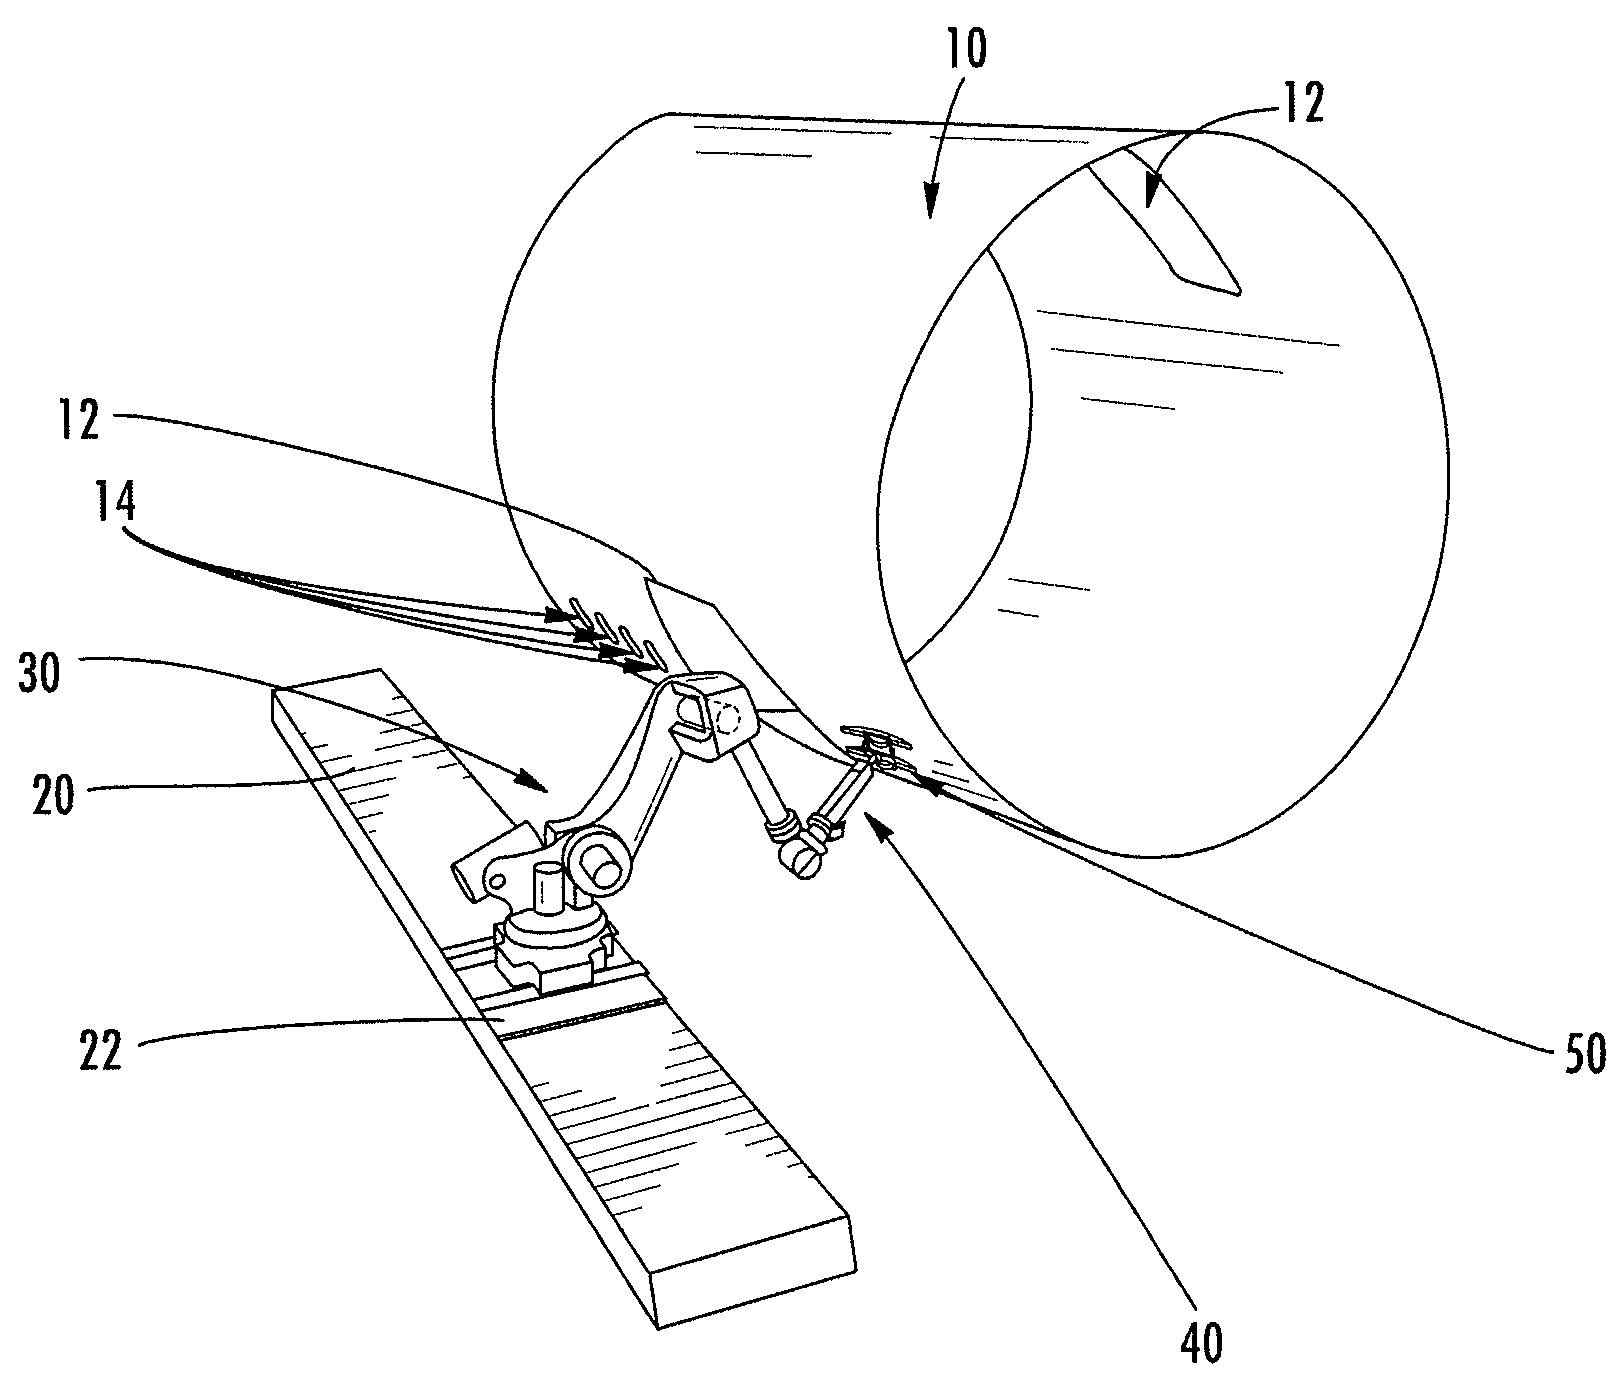 Ultrasonic inspection apparatus, system, and method